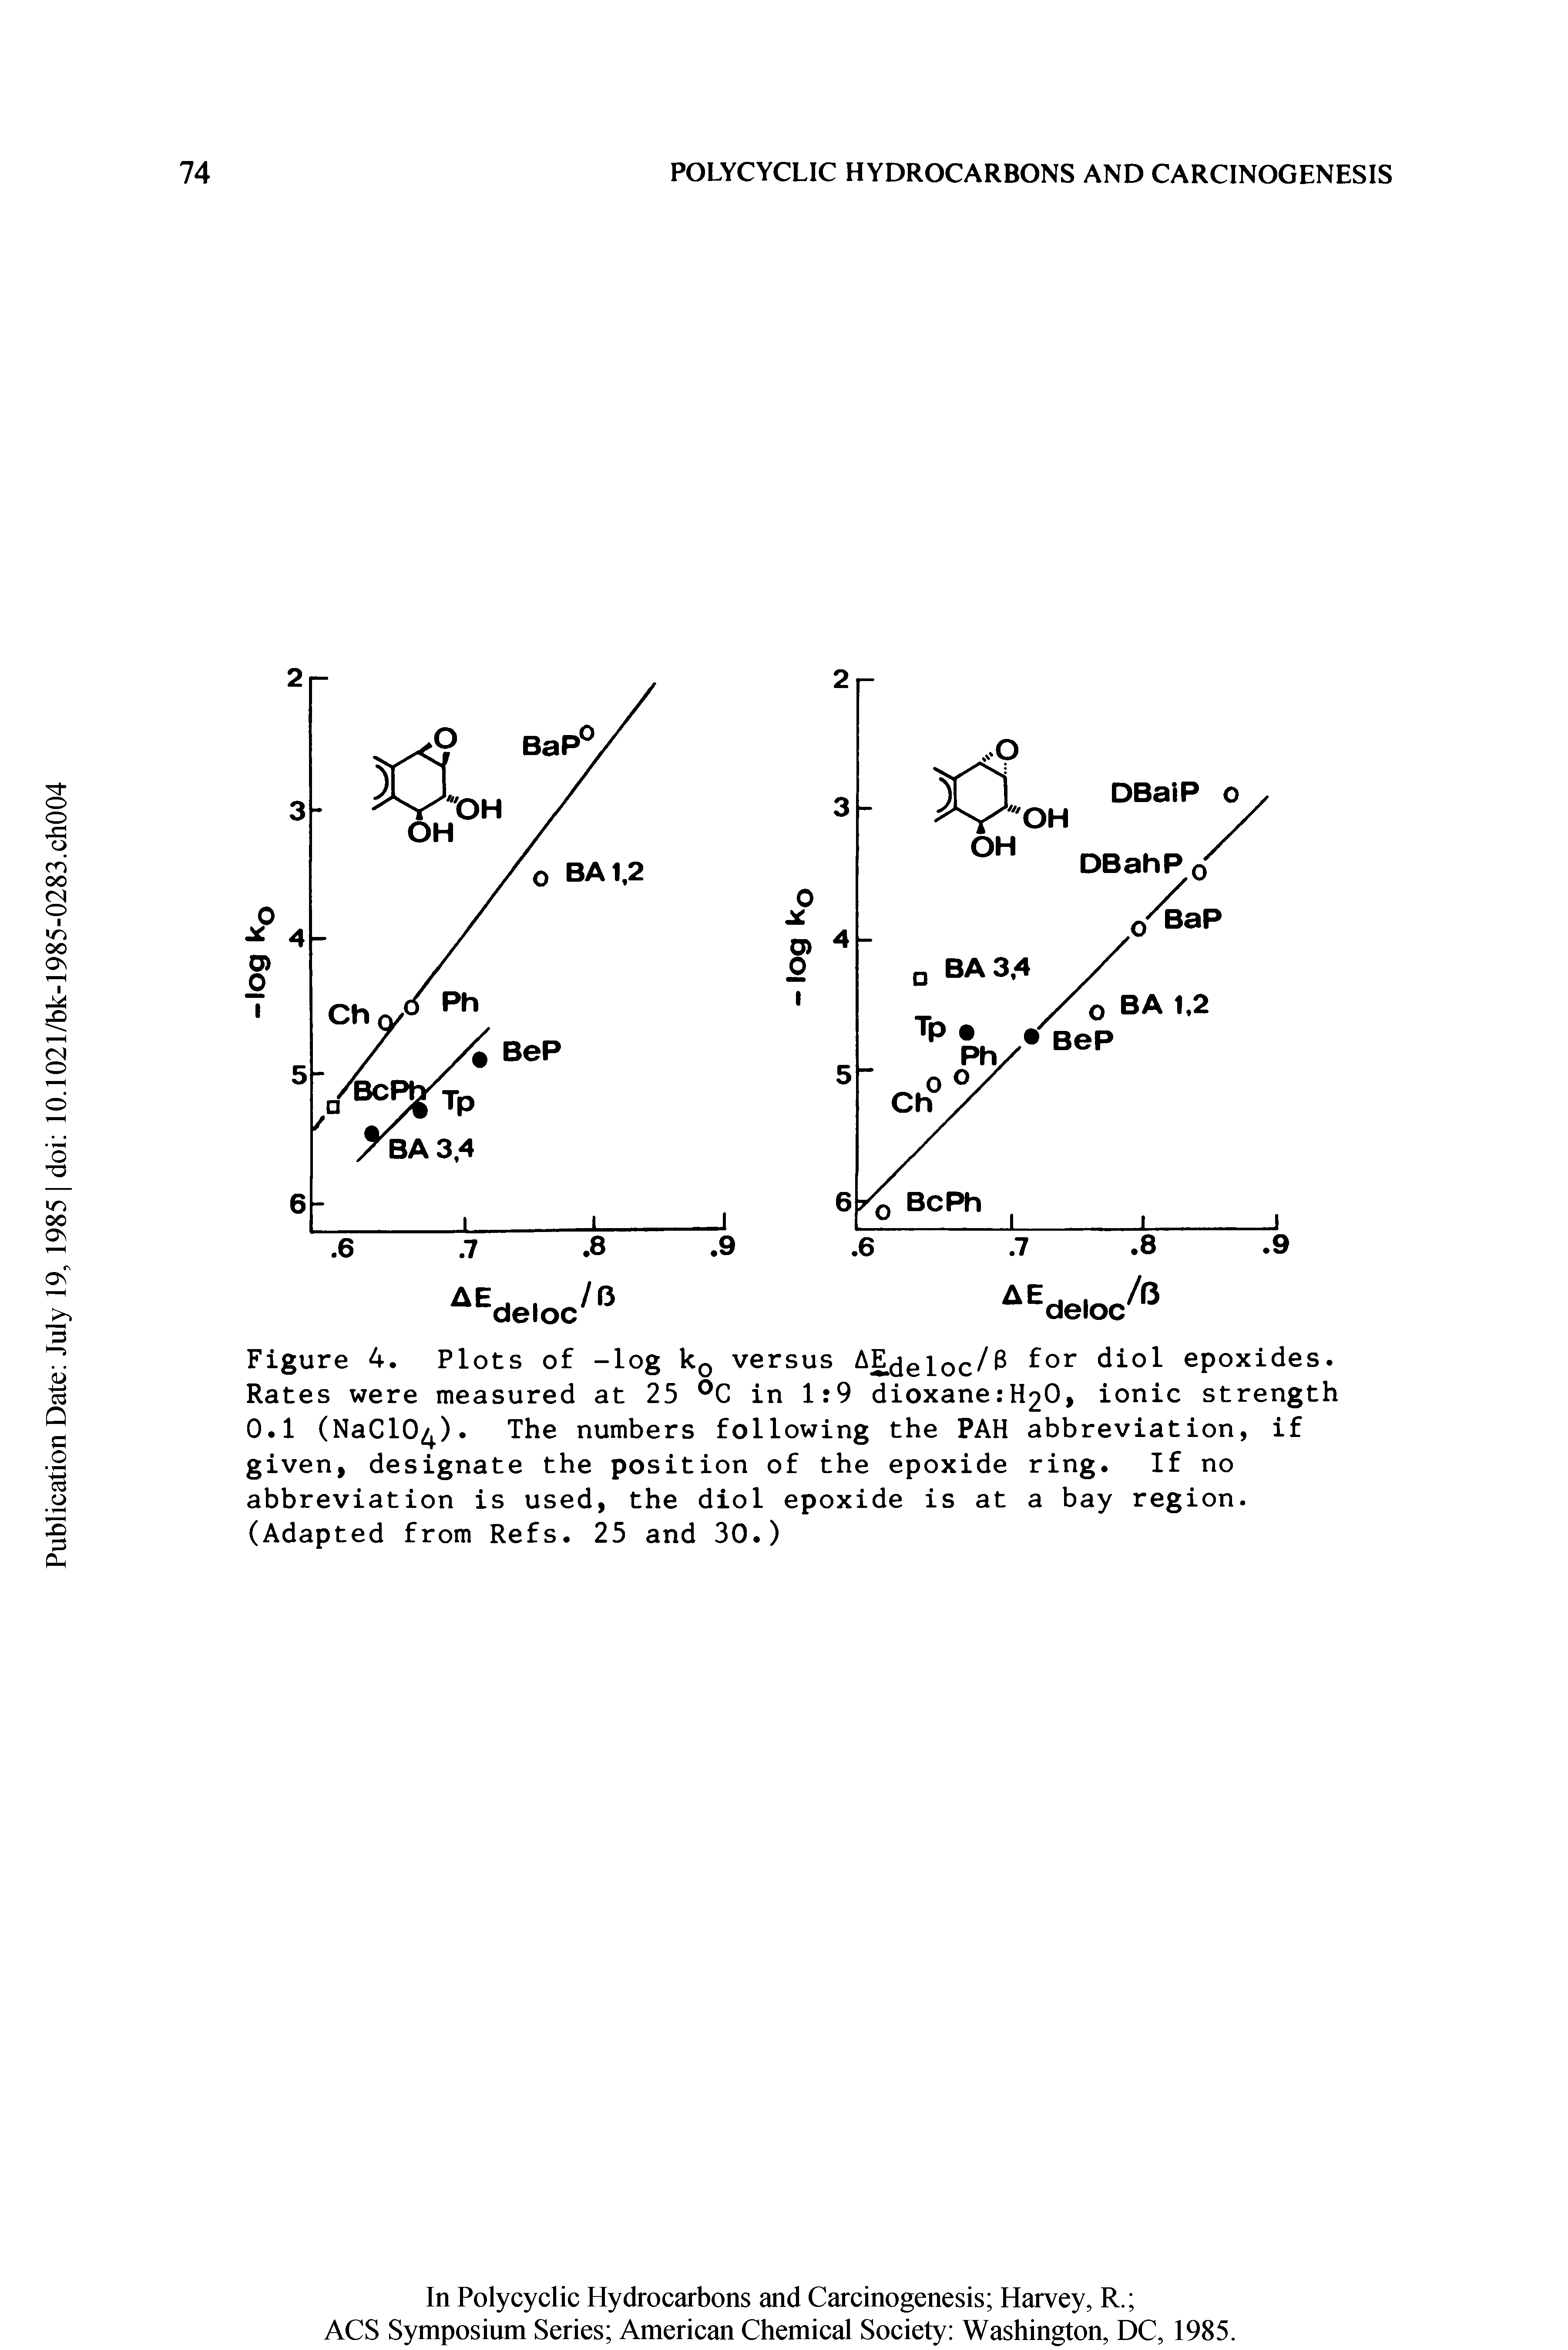 Figure 4. Plots of -log k0 versus AE eloc/ for diol epoxides. Rates were measured at 25 °C in 1 9 dioxaneit O, ionic strength 0.1 (NaClO ). The numbers following the PAH abbreviation, if given, designate the position of the epoxide ring. If no abbreviation is used, the diol epoxide is at a bay region. (Adapted from Refs. 25 and 30.)...